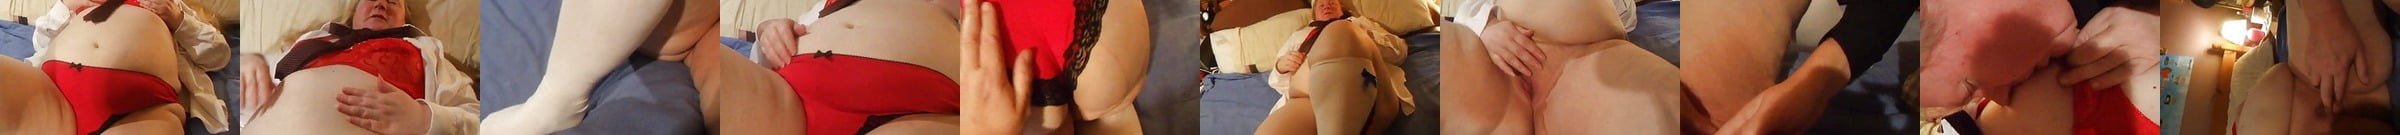 He Fucks Fat Mature Housewife Free Fat Cd Tube Porn Video Xhamster